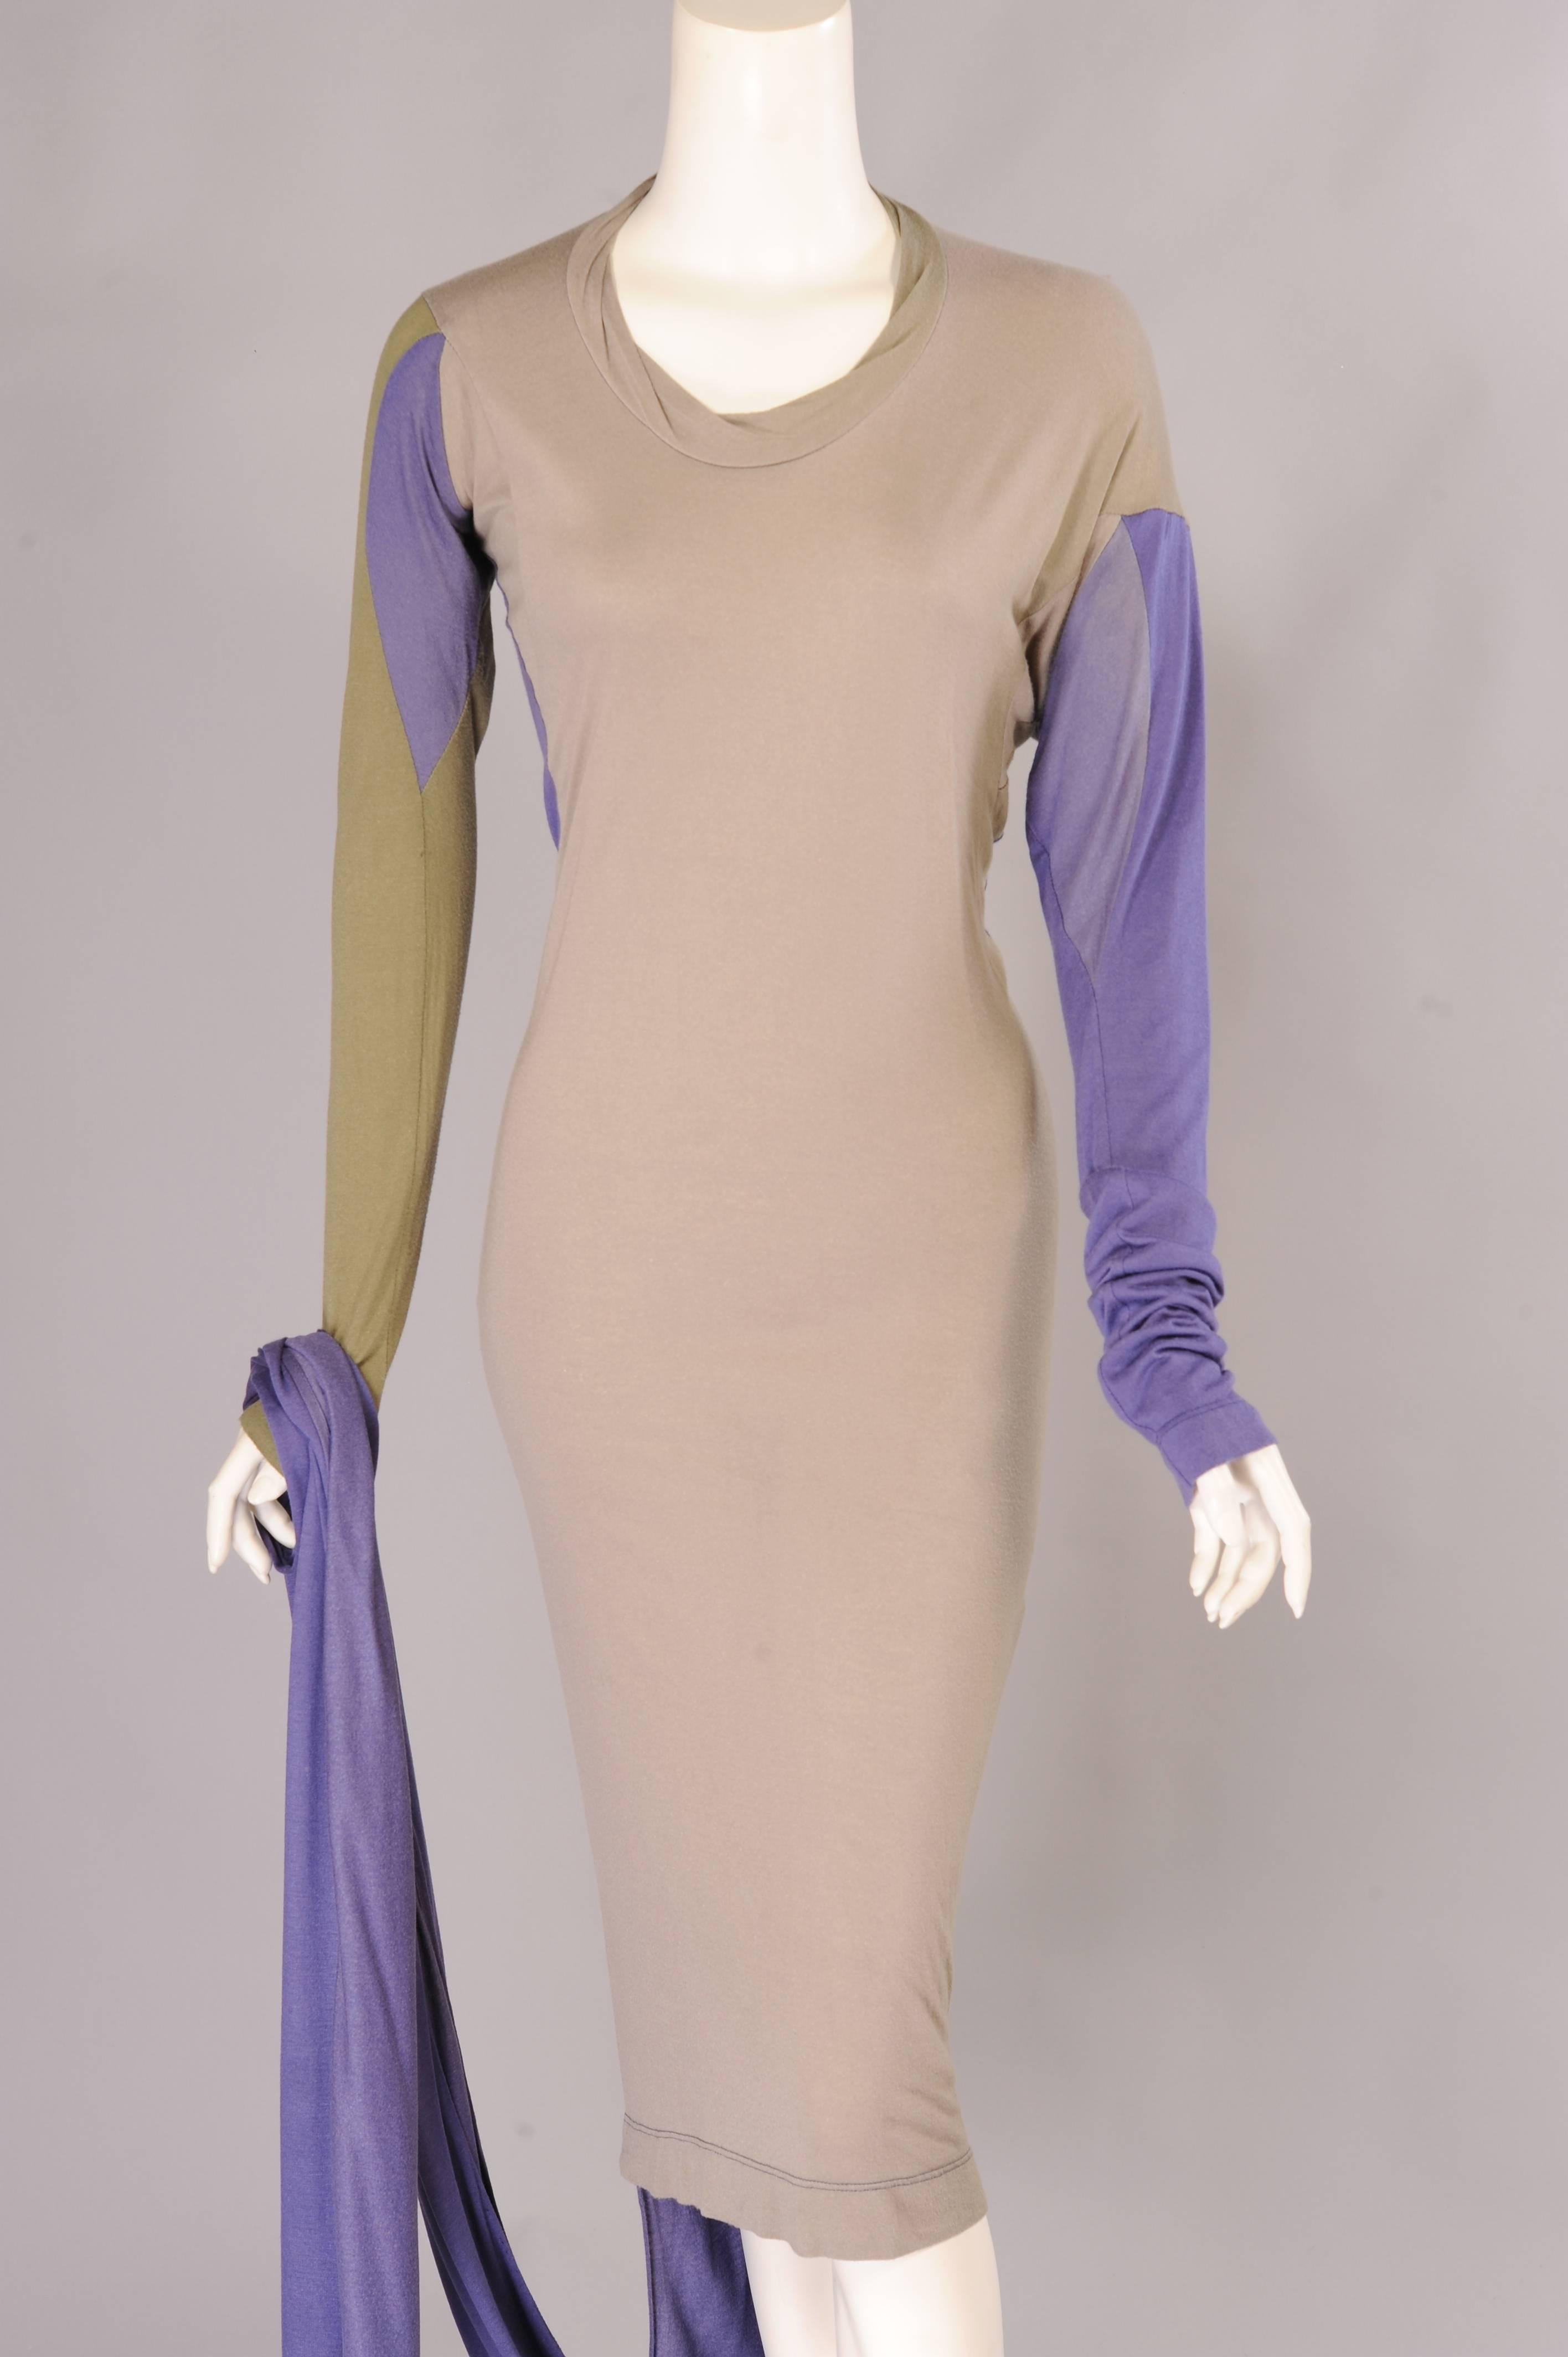 Grey-beige, lavender and khaki green combine in this Tee shirt dress from Vivienne Westwood. The dress has a round neckline, long sleeves and a purposefully mismatched shoulder line. The front of the dress is knee length. The back of the dress is